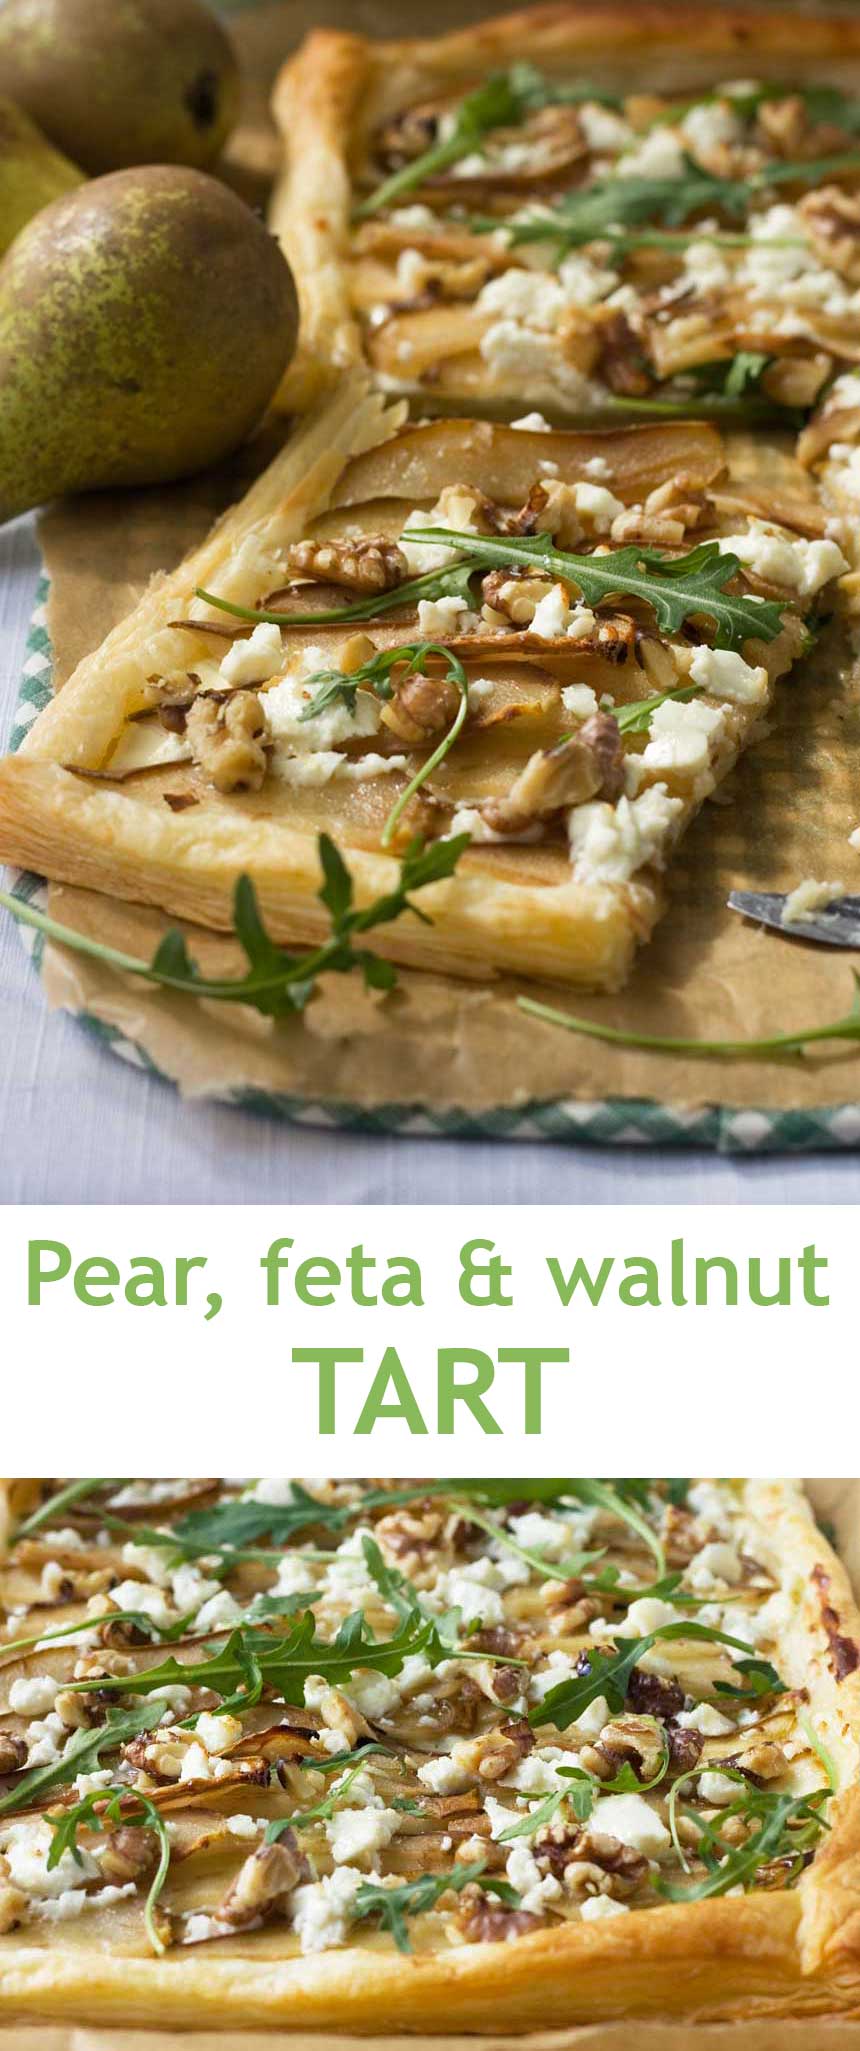 Pinterest pin showing Pear, feta and walnut tart sliced into quarters on brown paper.